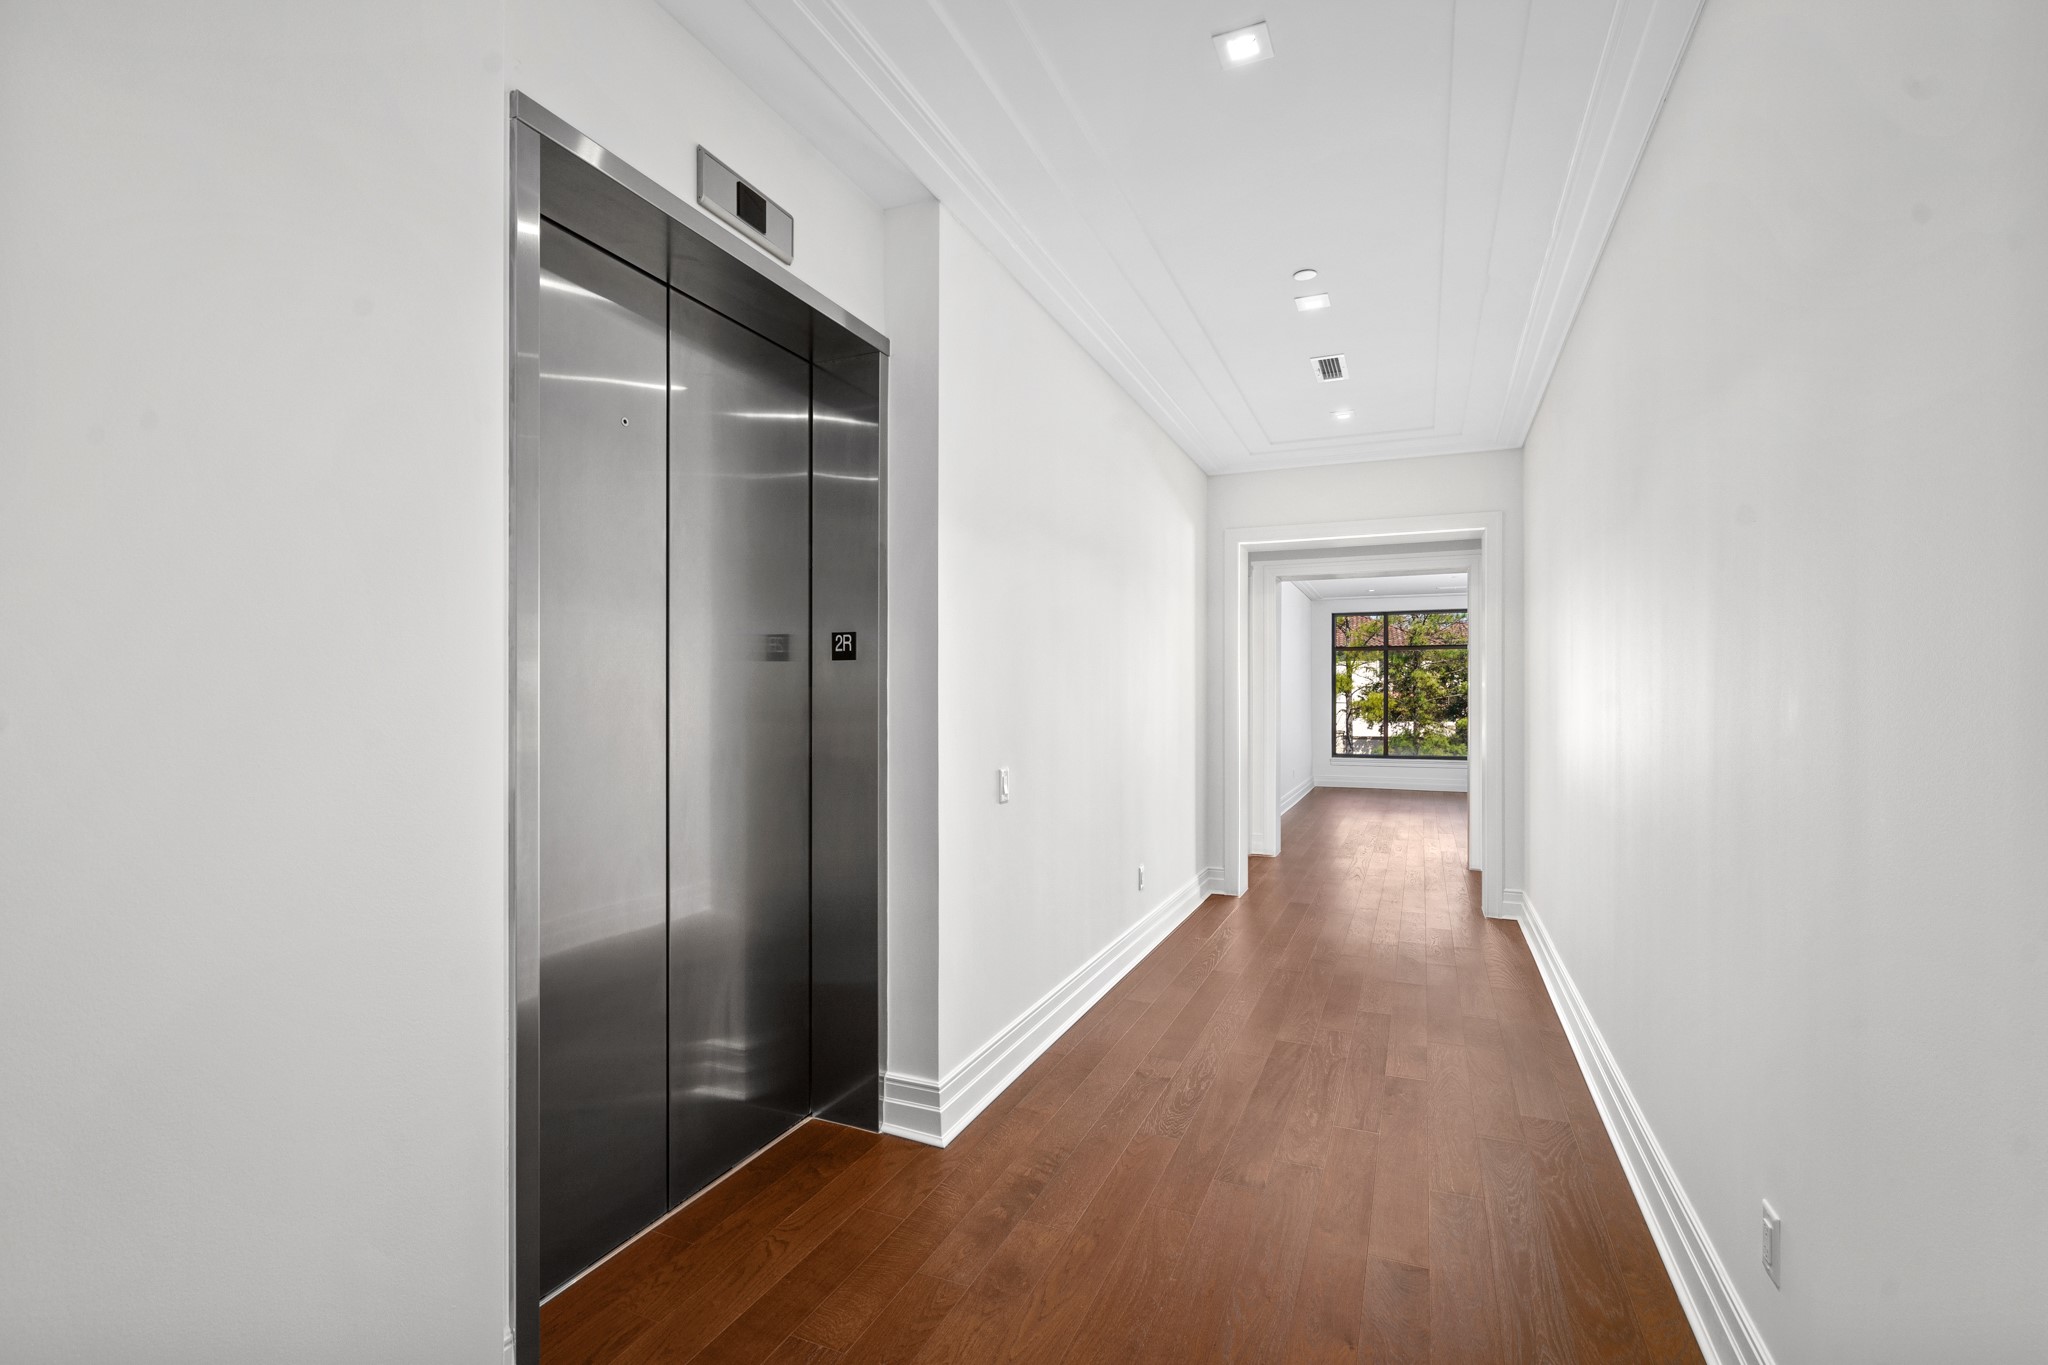 The elevator-facing entrance opens into a broad reception hallway perfect for displaying art.